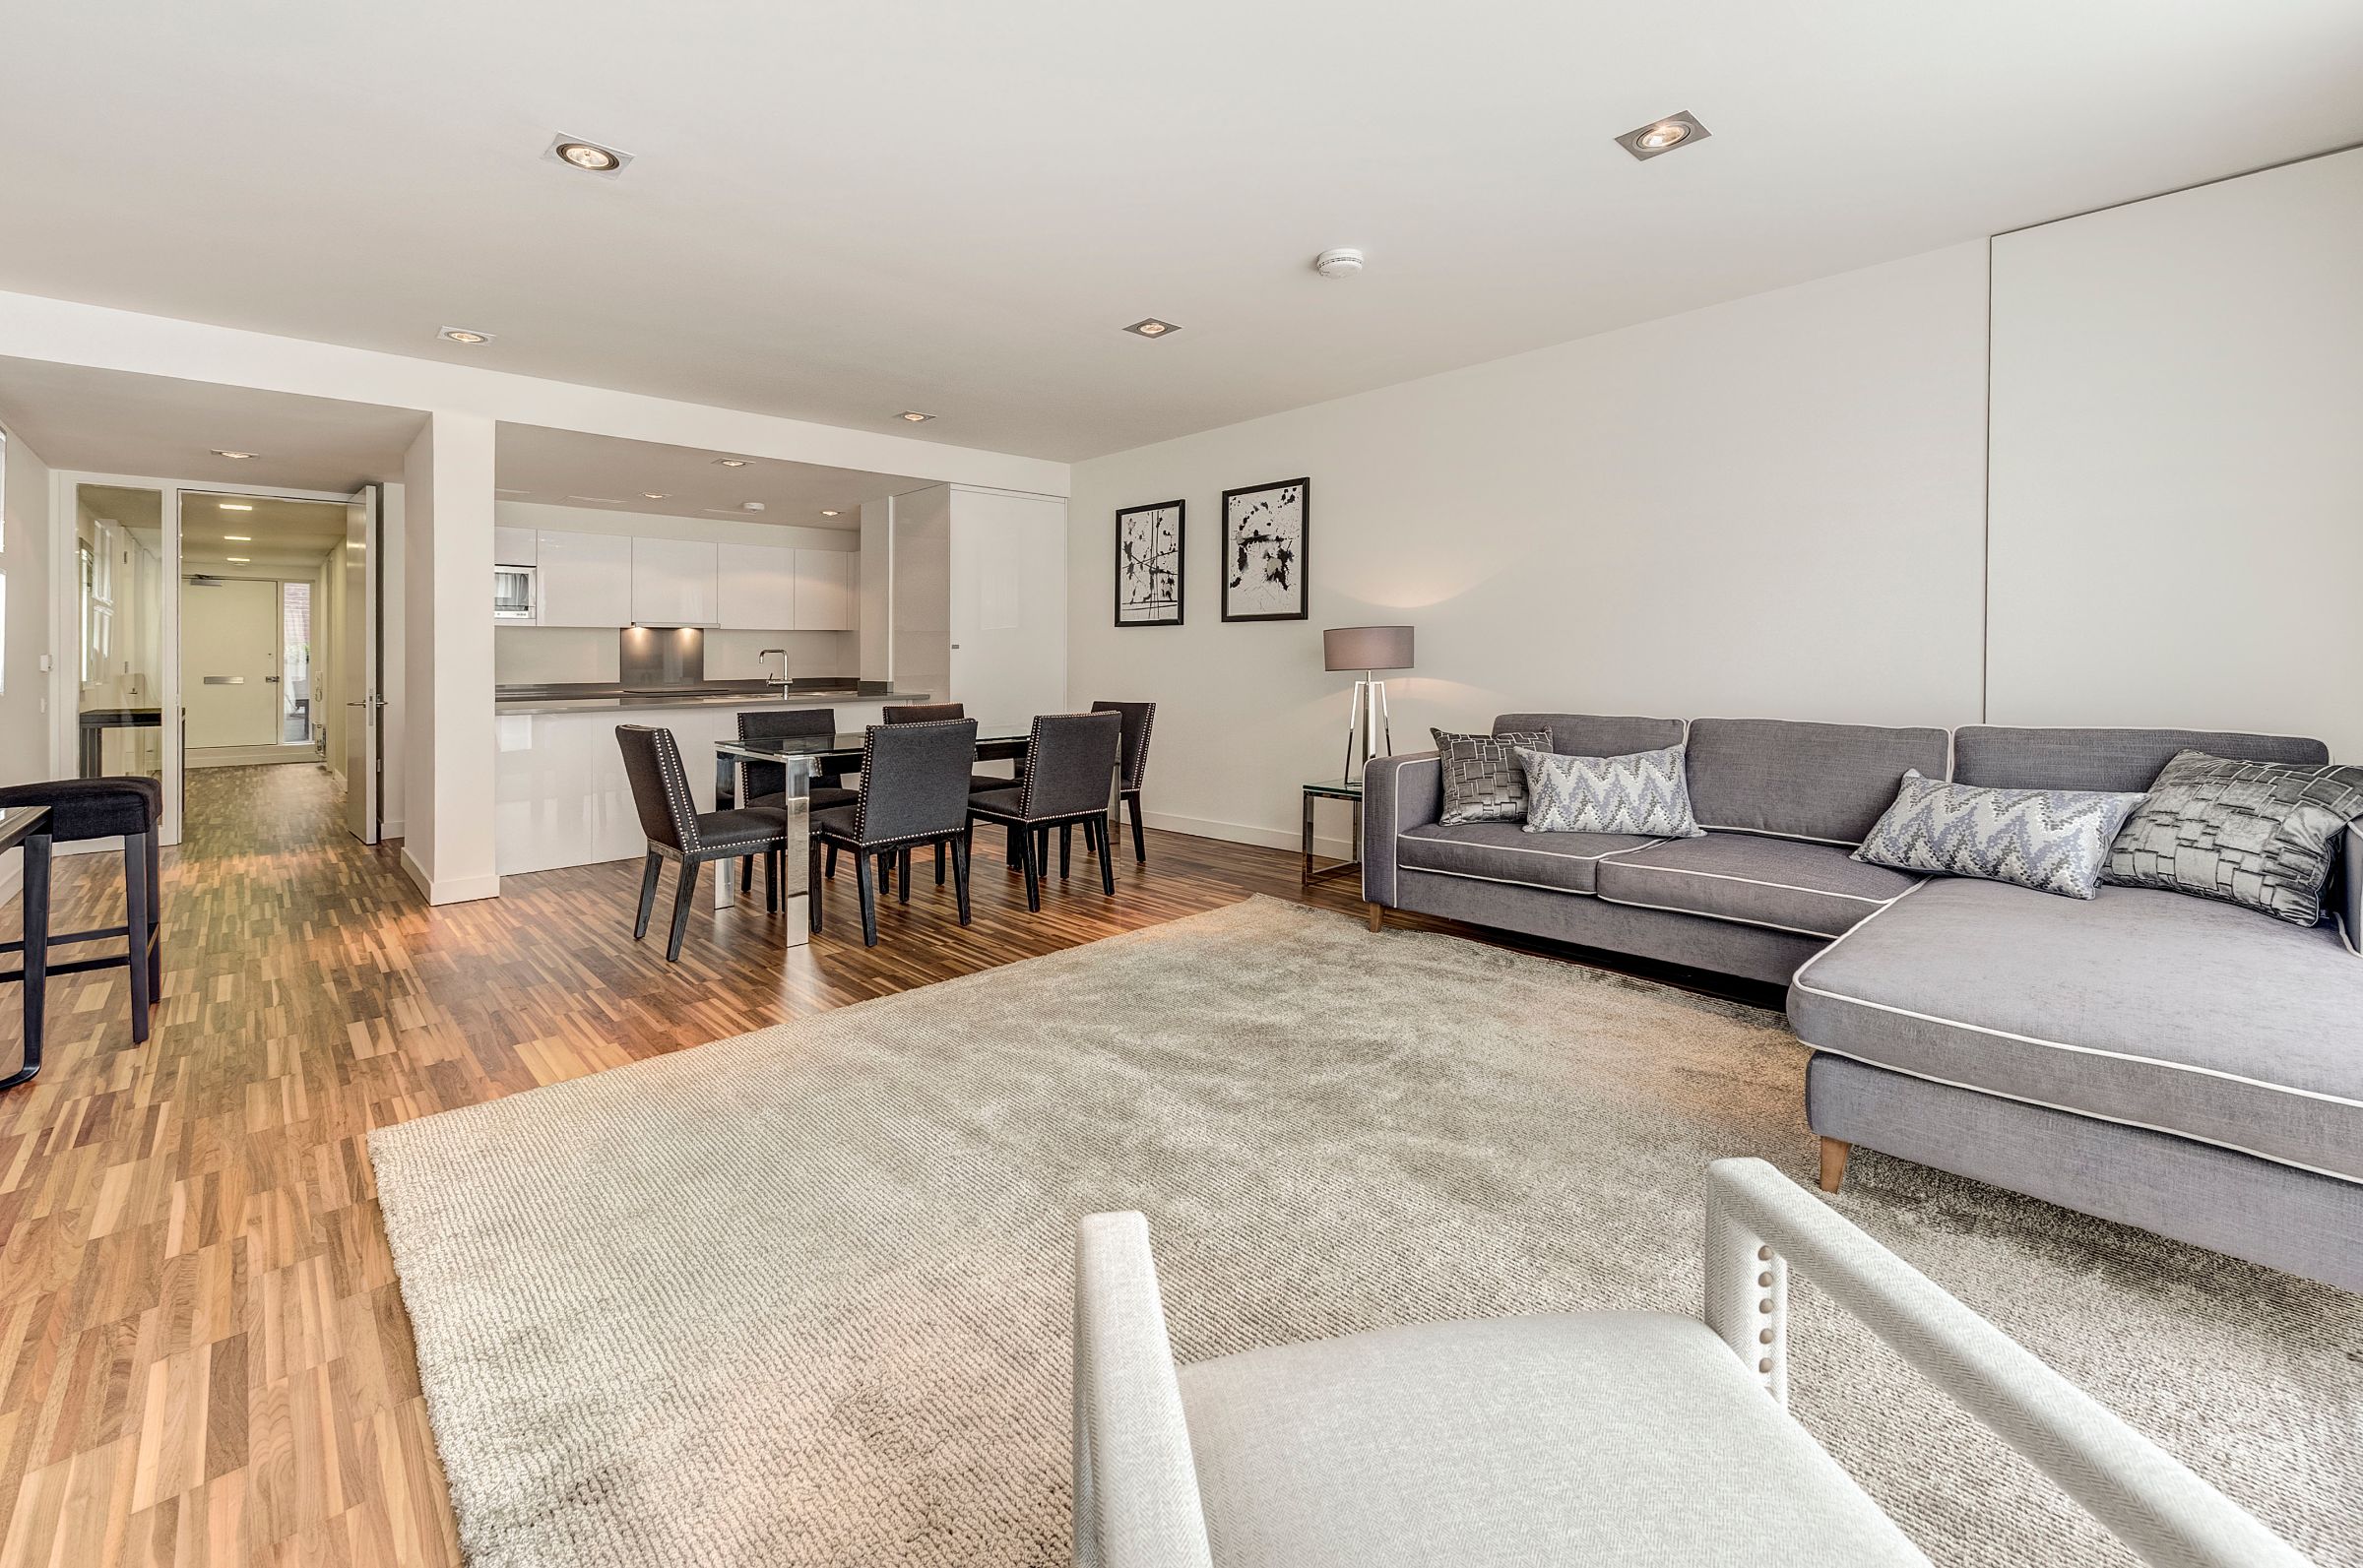 2 bed Apartment for rent in London. From AbbeySpring London